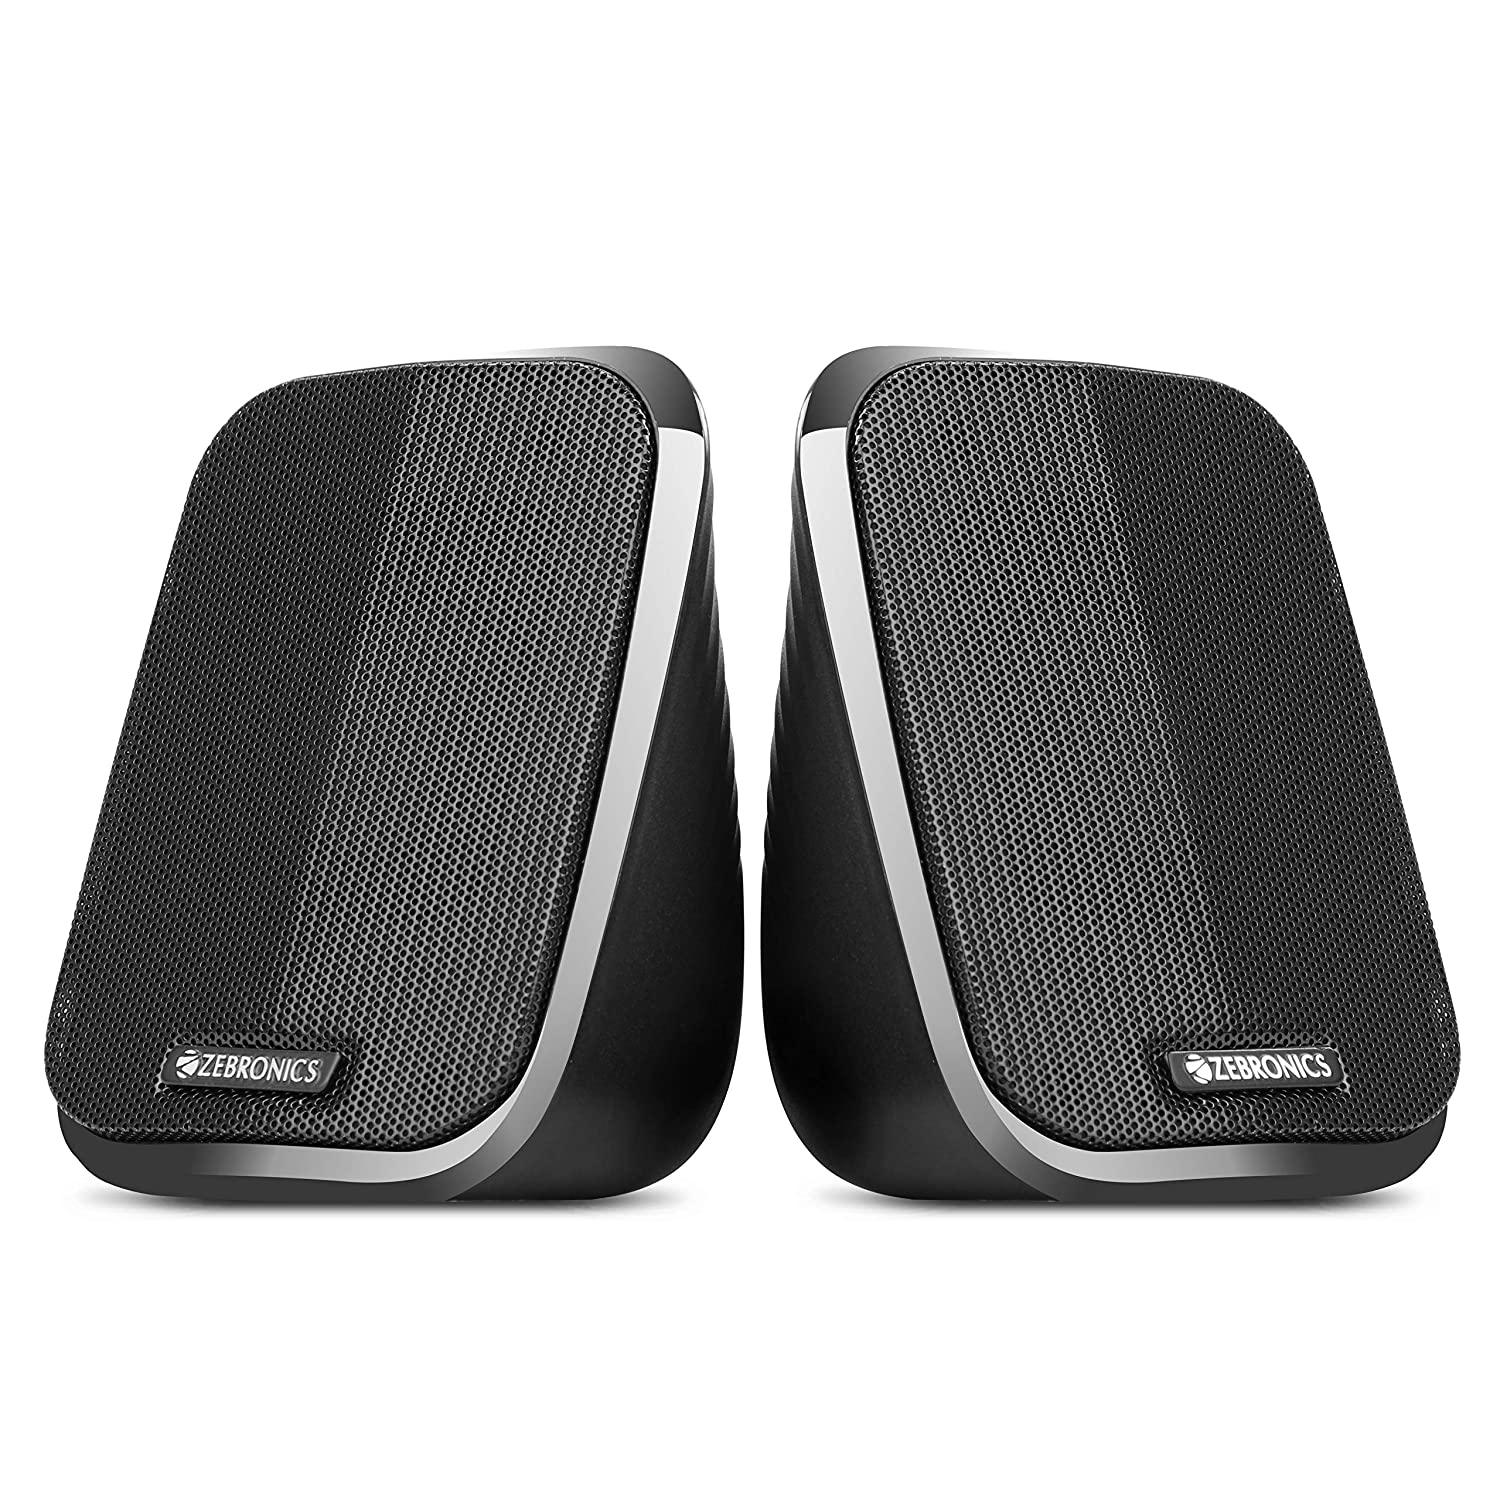 Zebronics: ZebFame 2.0 Channel Computer Multimedia Speaker with USB and Aux